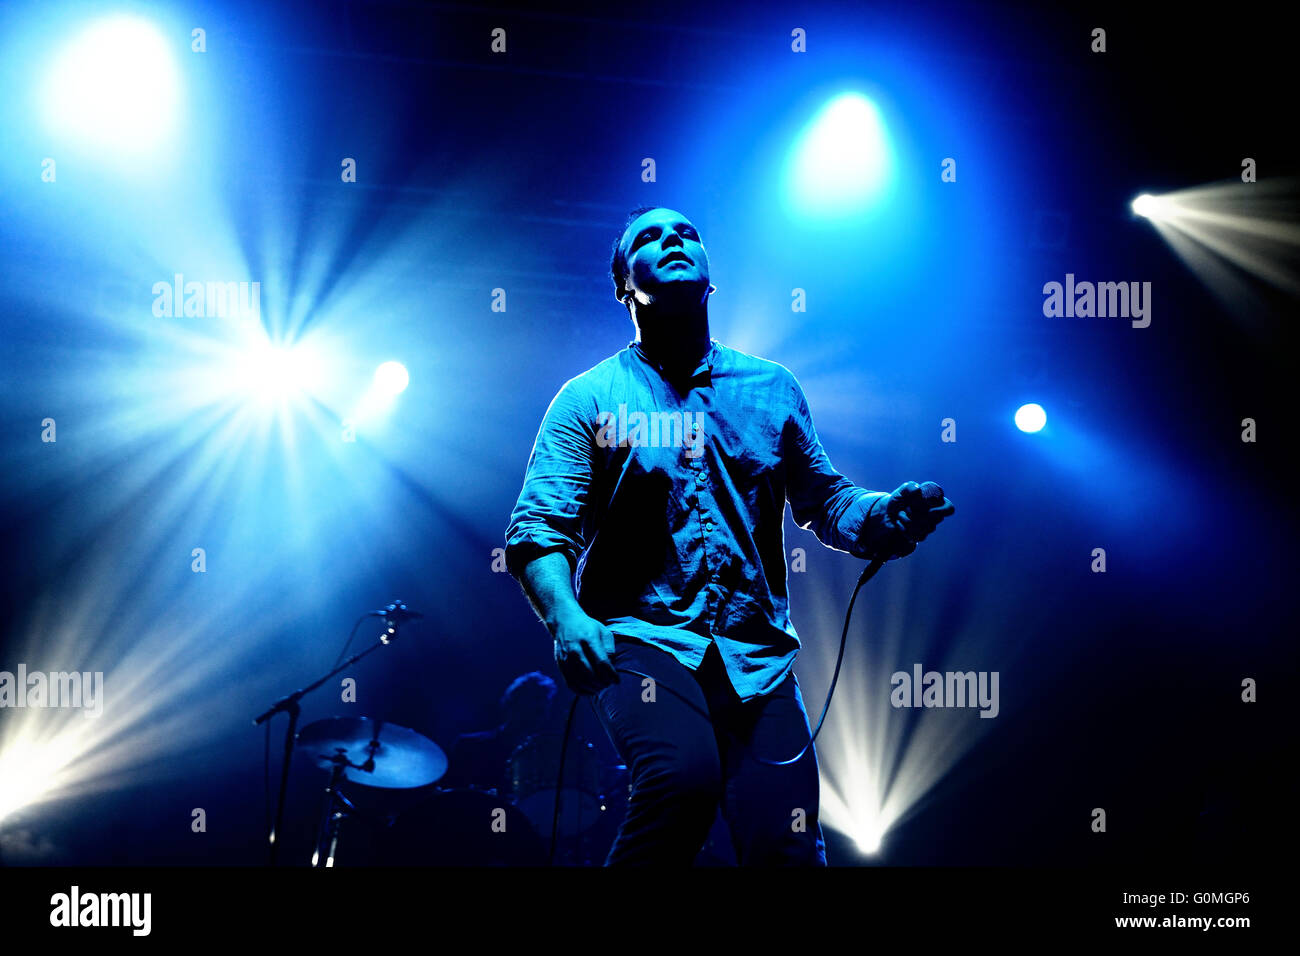 BARCELONA - OCT 20: Future Islands (synthpop electronic dance band) performs at Razzmatazz stage. Stock Photo